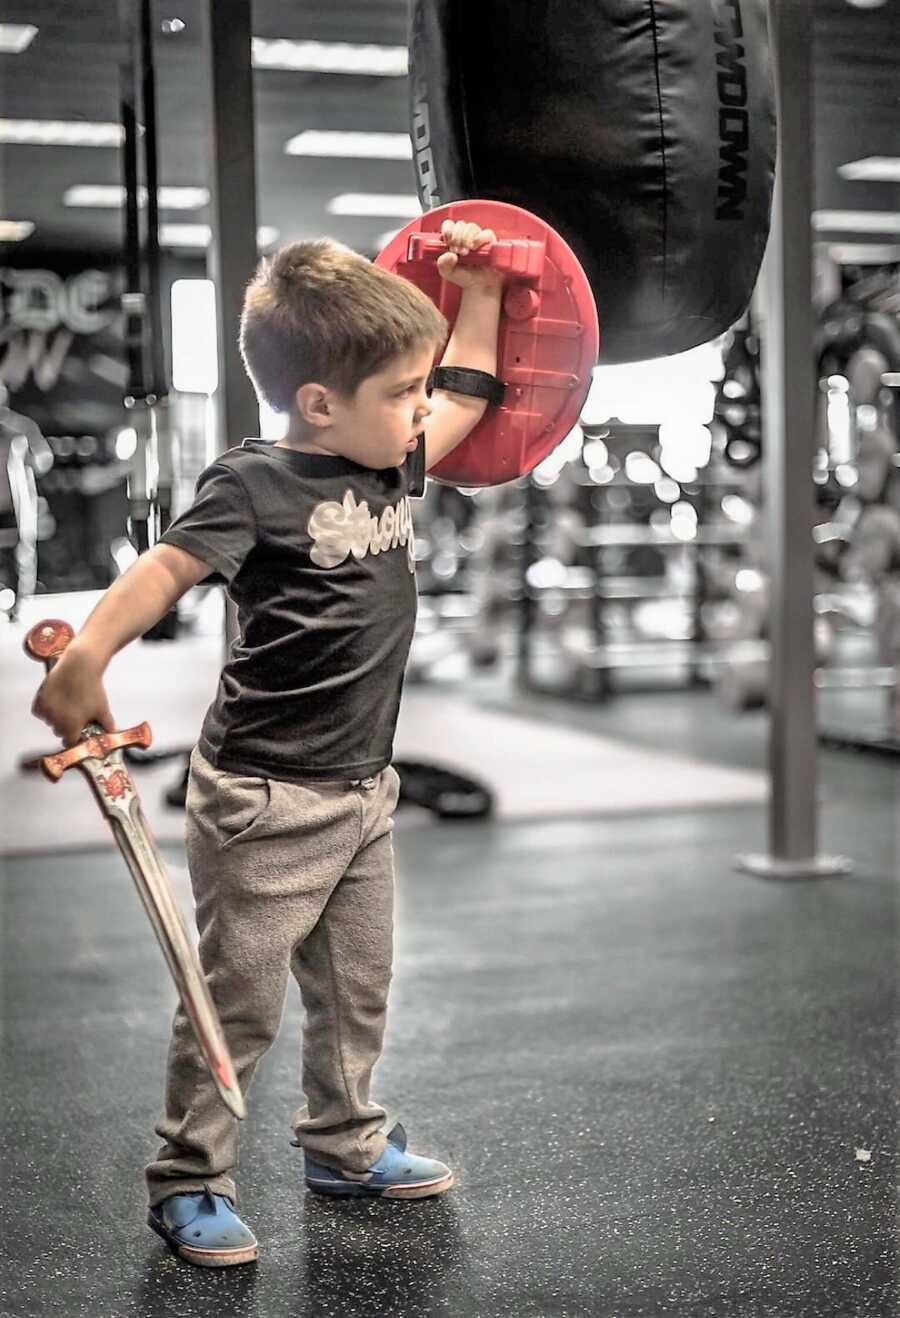 Toddler boy playing with sword and shield toys at the gym